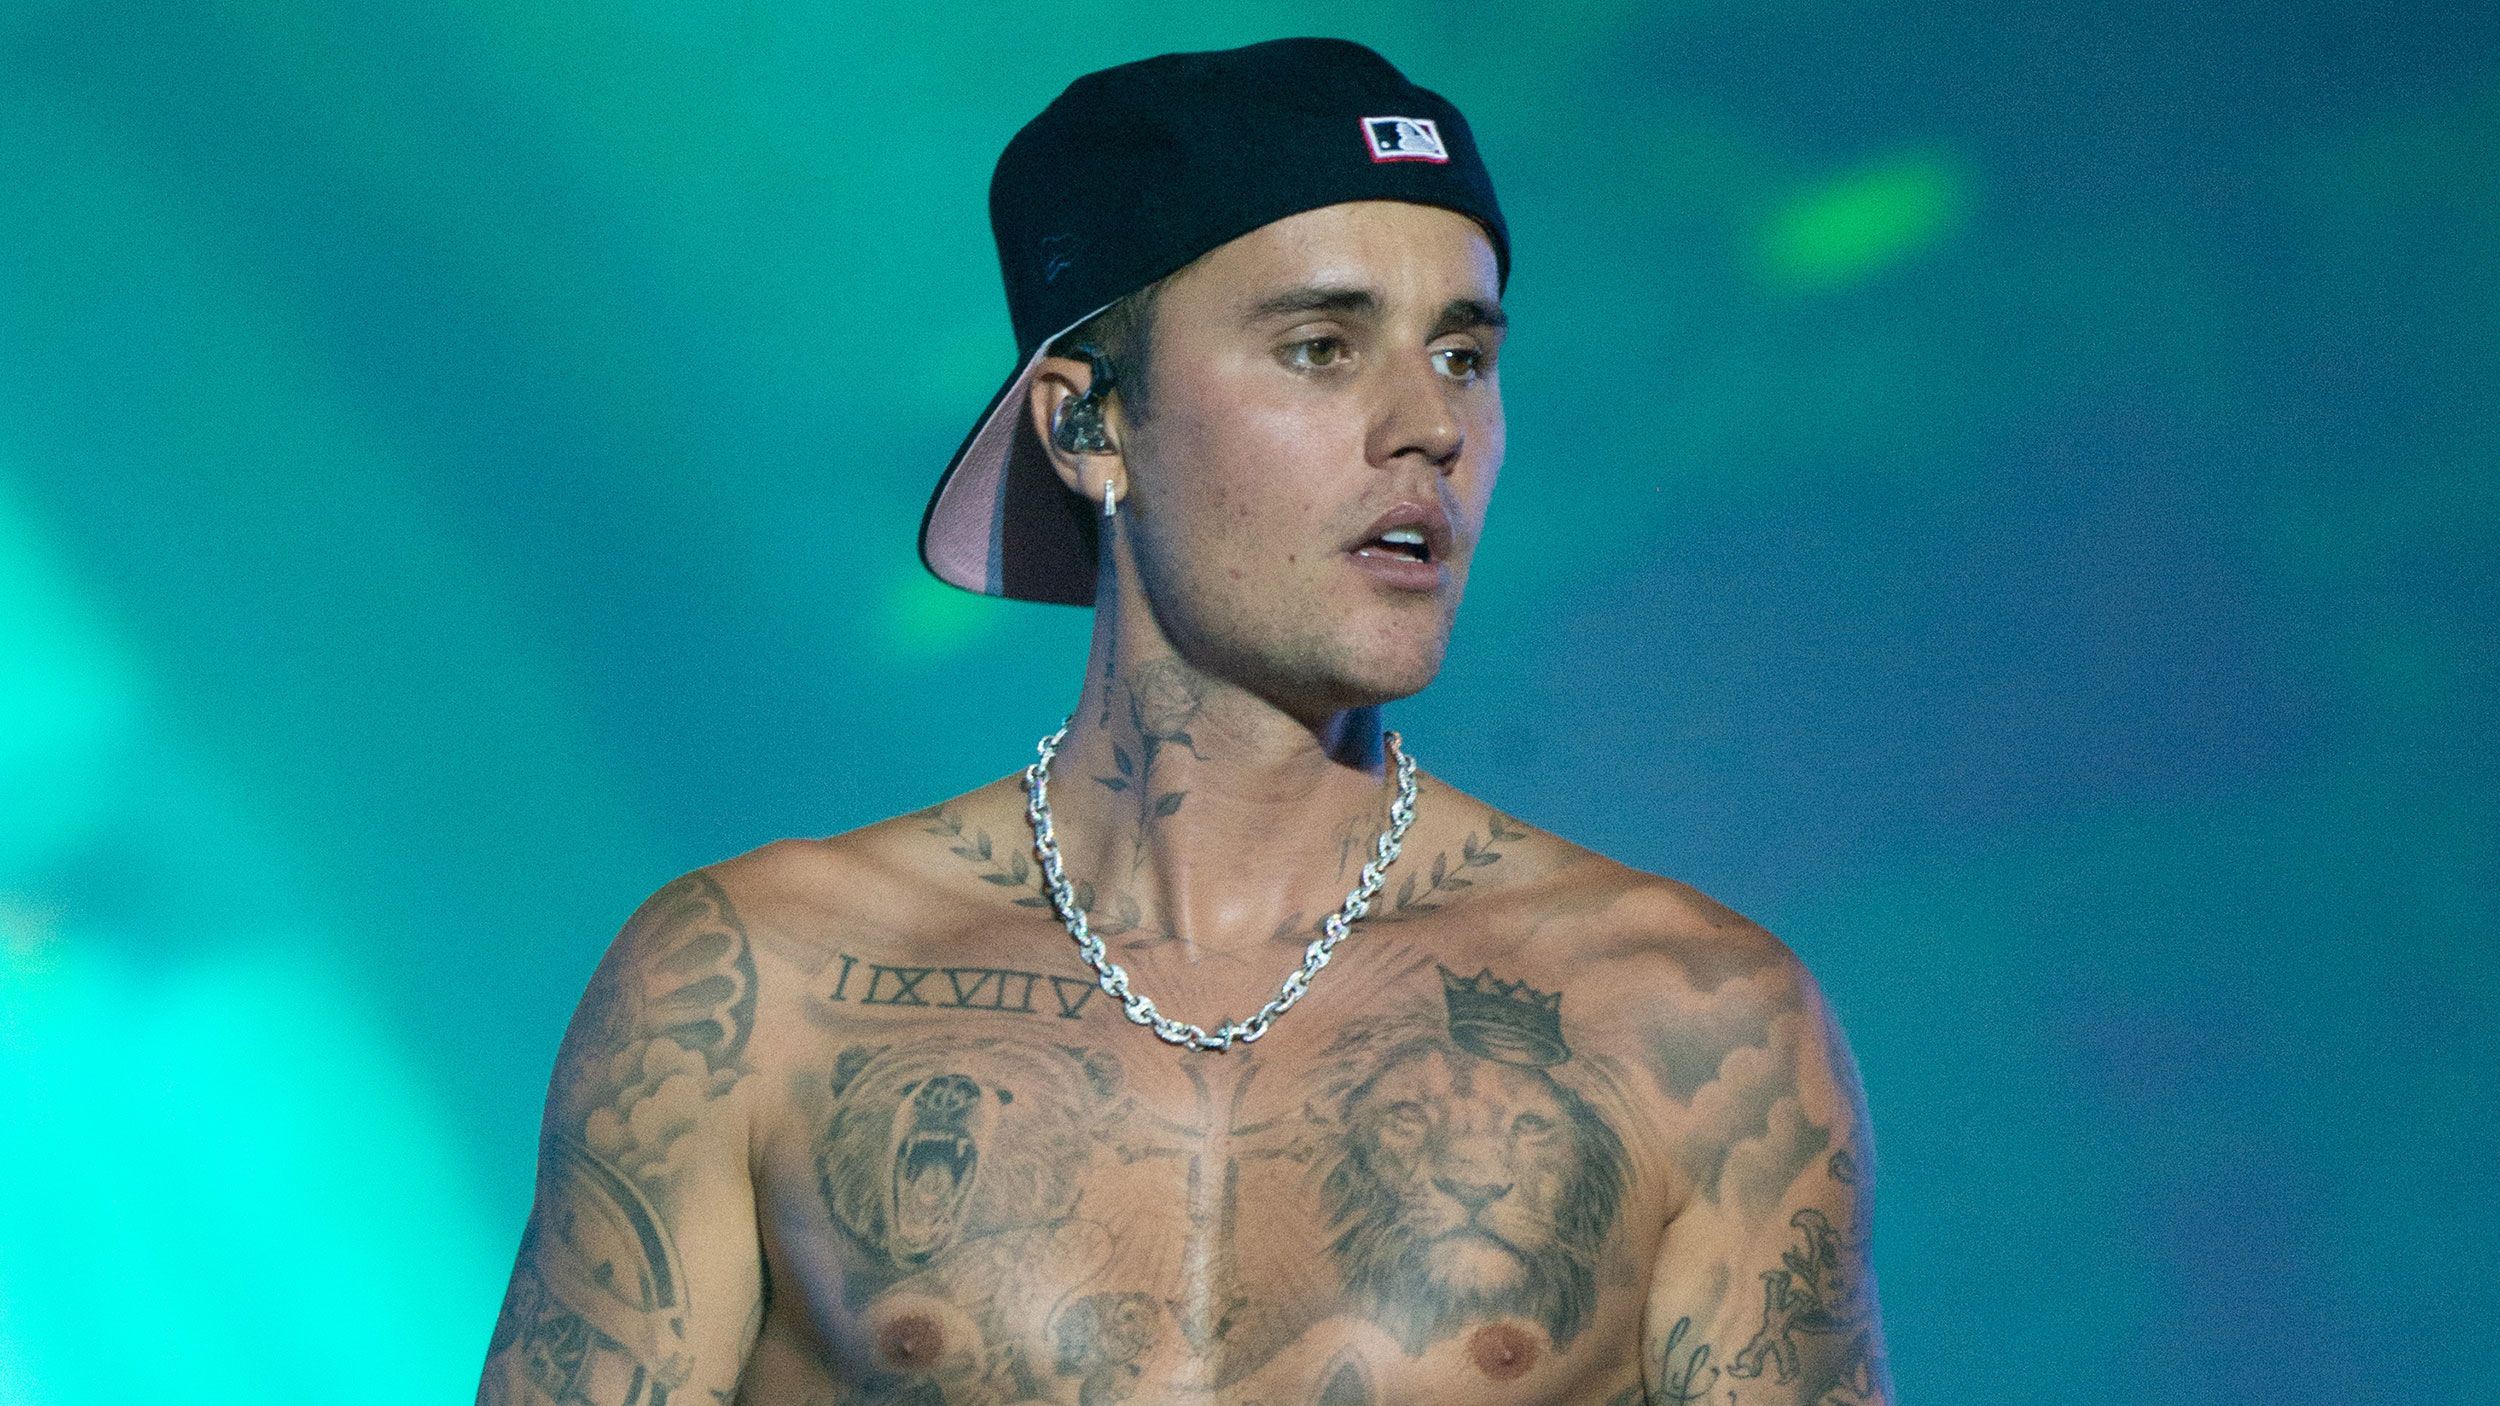 Bieber close to $200 Million deal to sell his music rights